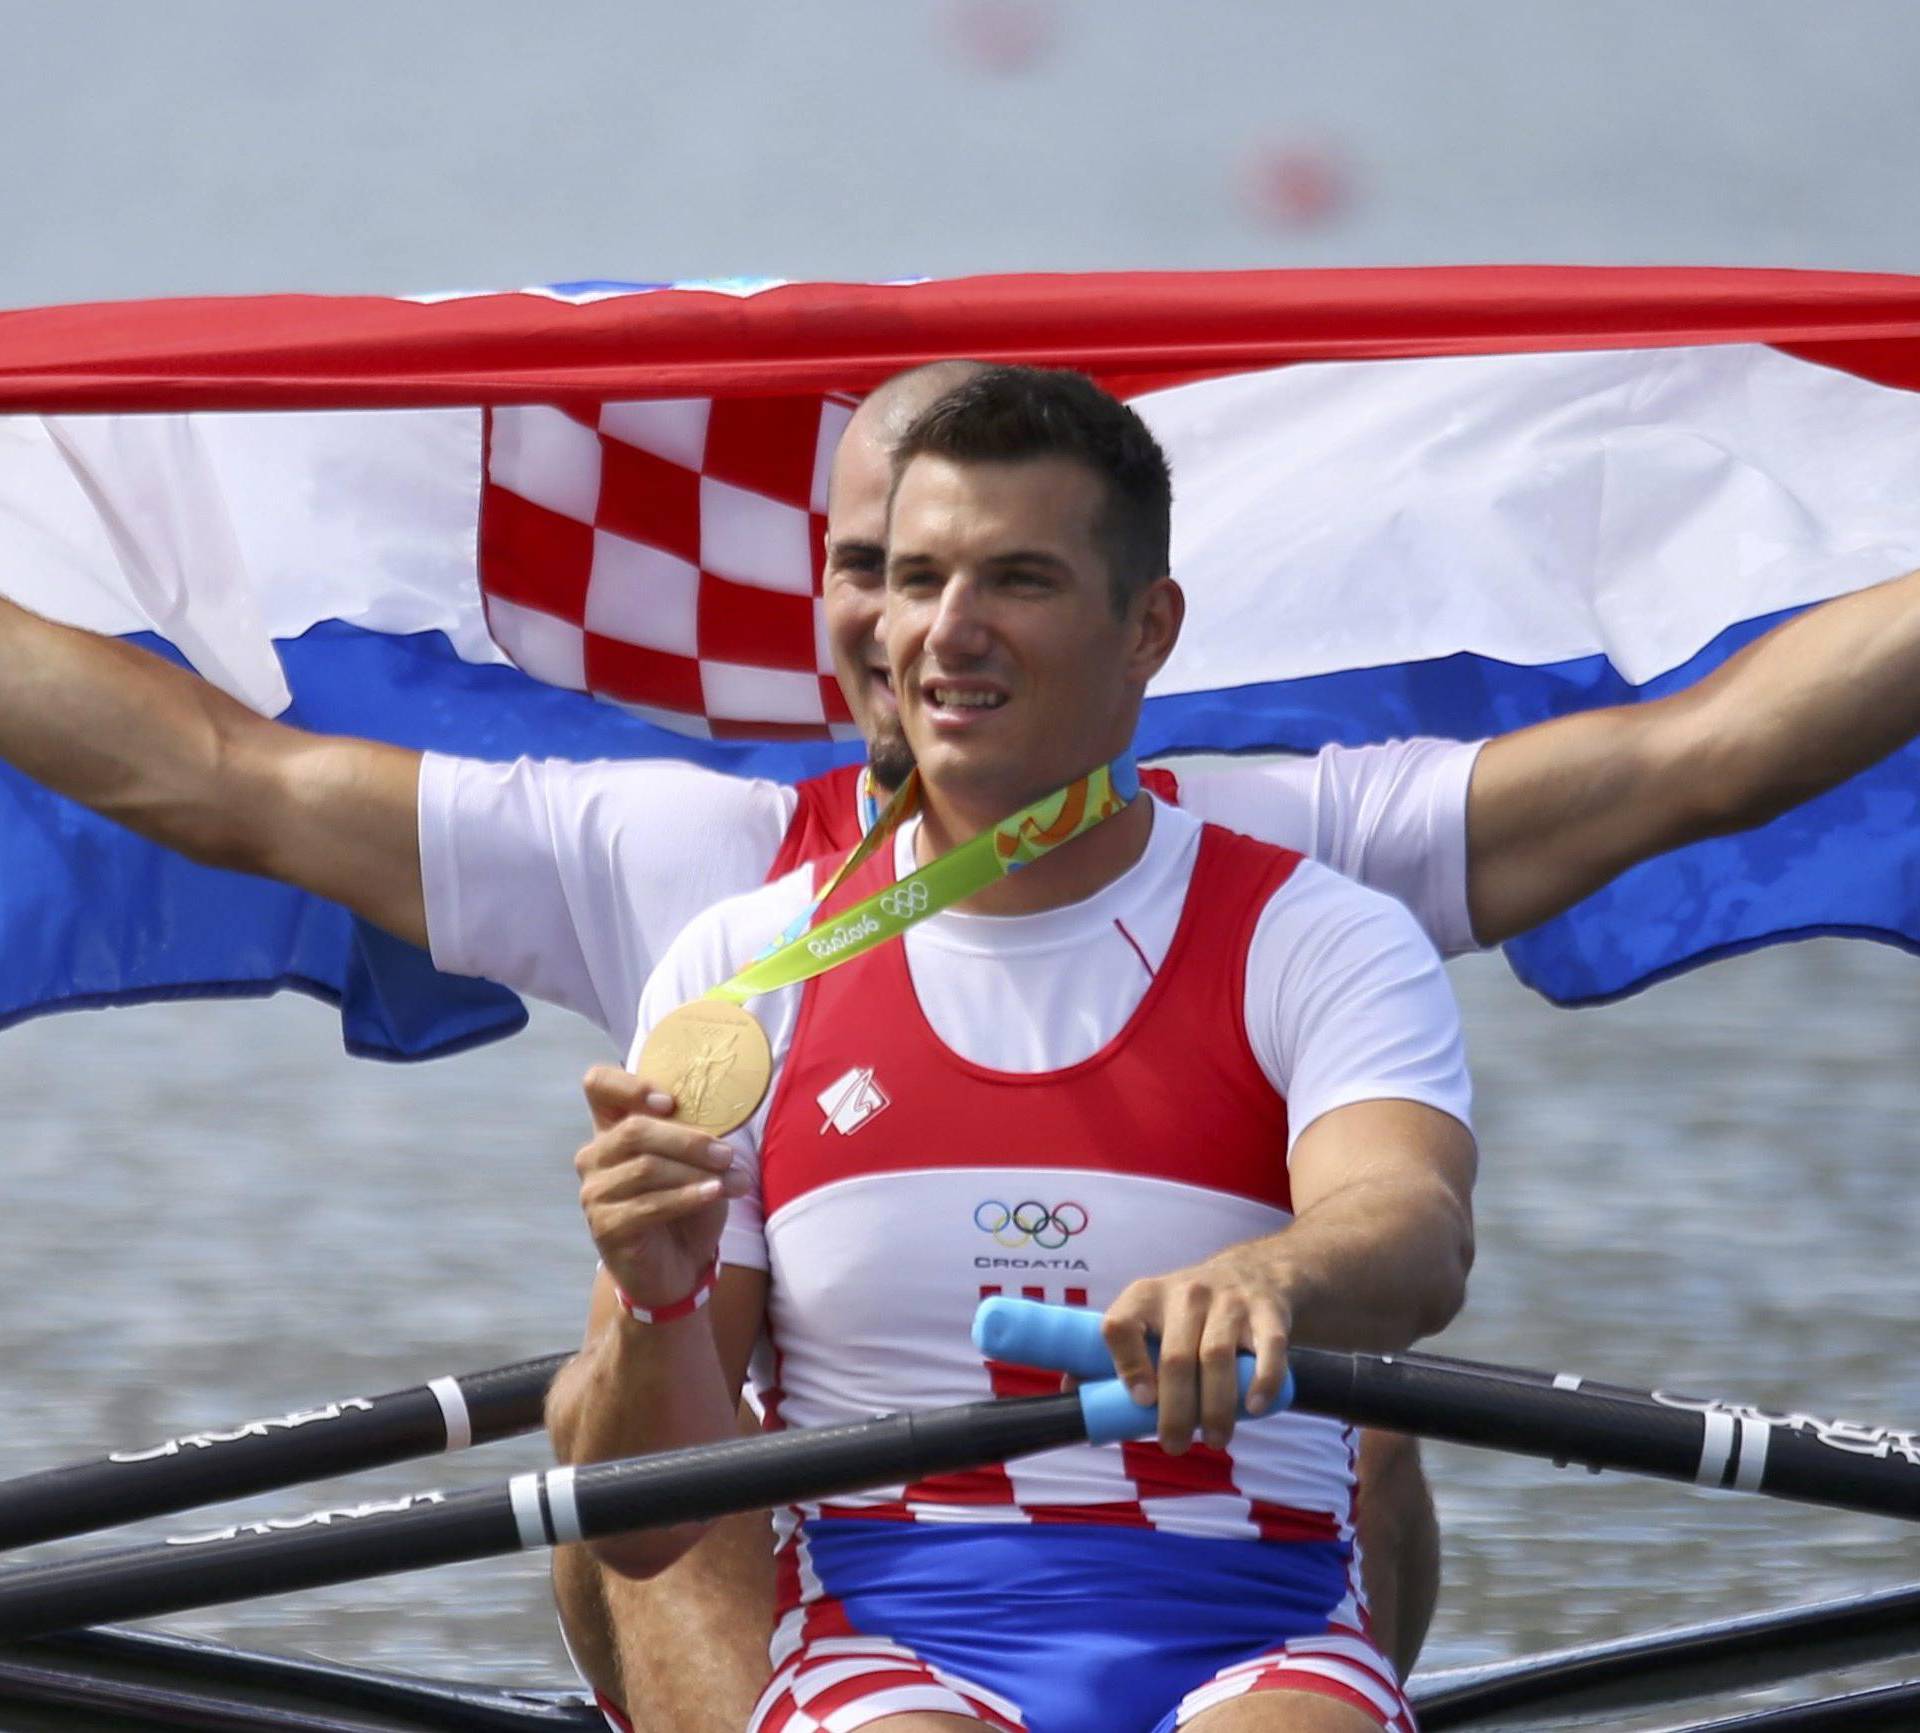 Rowing - Men's Double Sculls Victory Ceremony